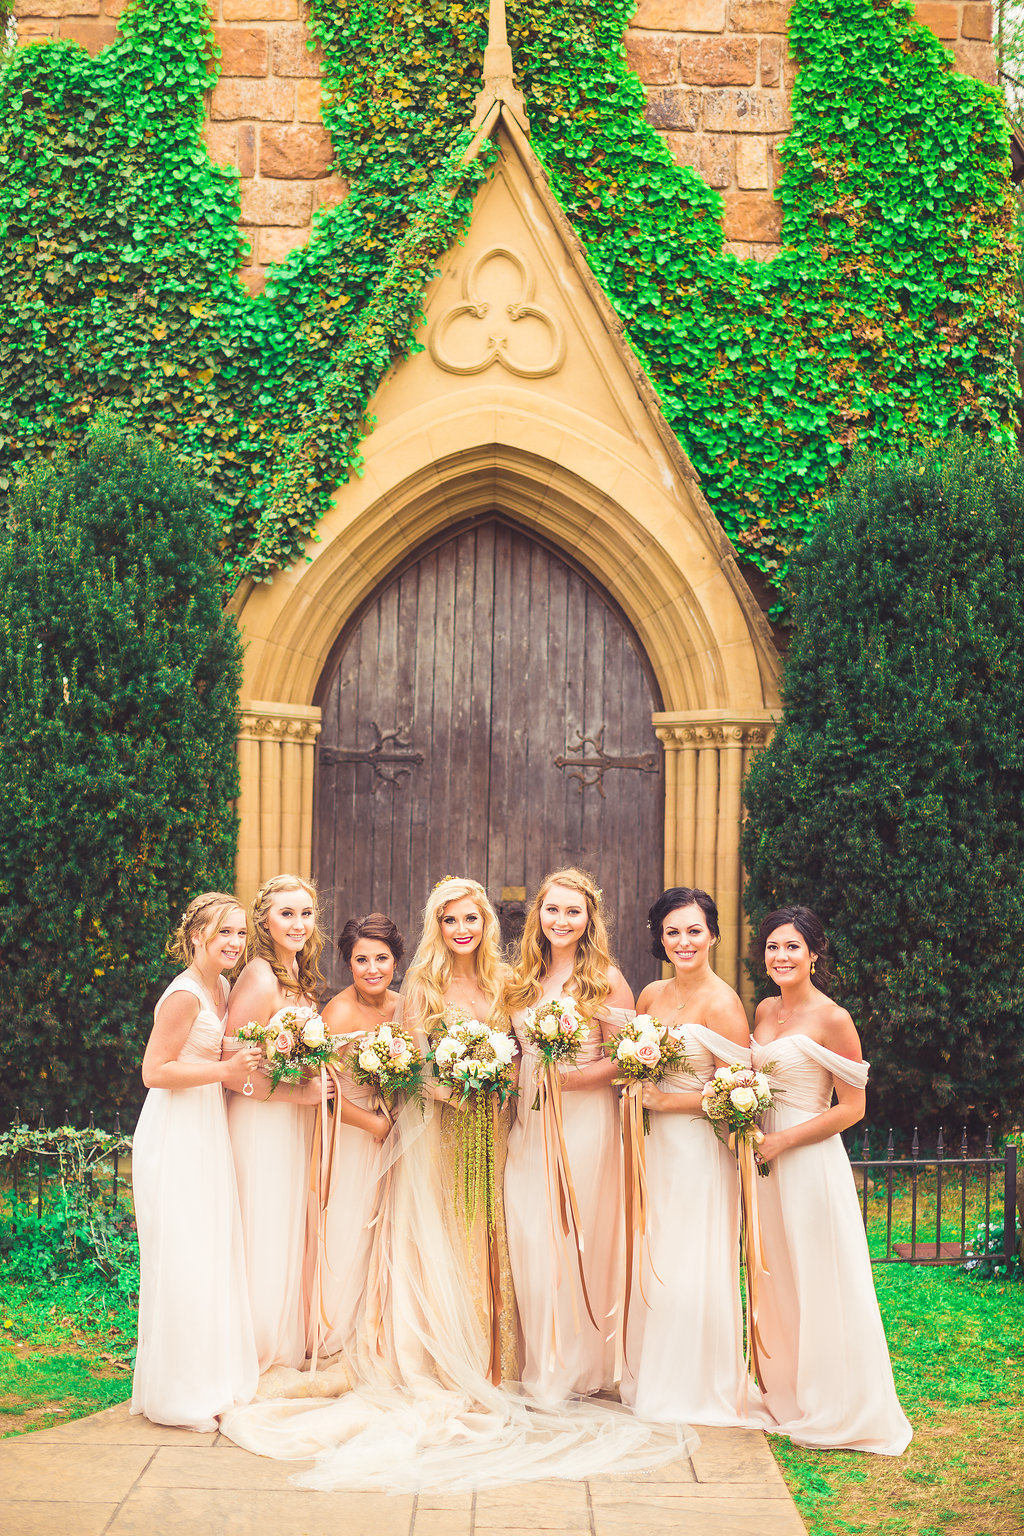 Wedding Photograph Of Bride and Bridesmaid Holding Flower Bouquets Los Angeles